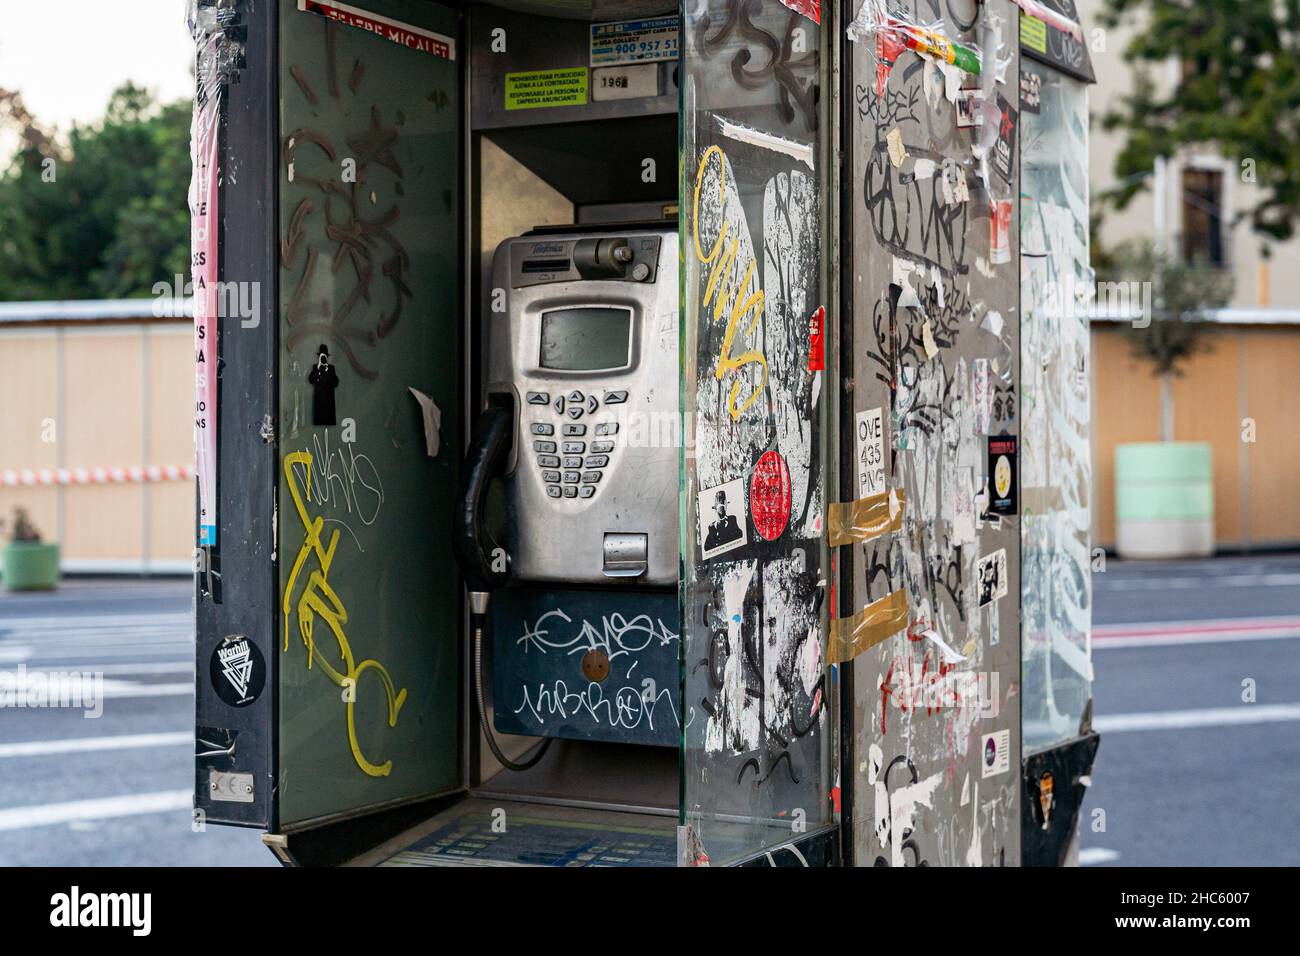 A phone booth seen in the streets of Valencia. According to the new General Telecommunications Law (LGT), phone booths will disappear in 2022. The appearance of the mobile phone has been the main cause of the disuse of these booths. (Photo by Xisco Navarro / SOPA Images/Sipa USA) Stock Photo